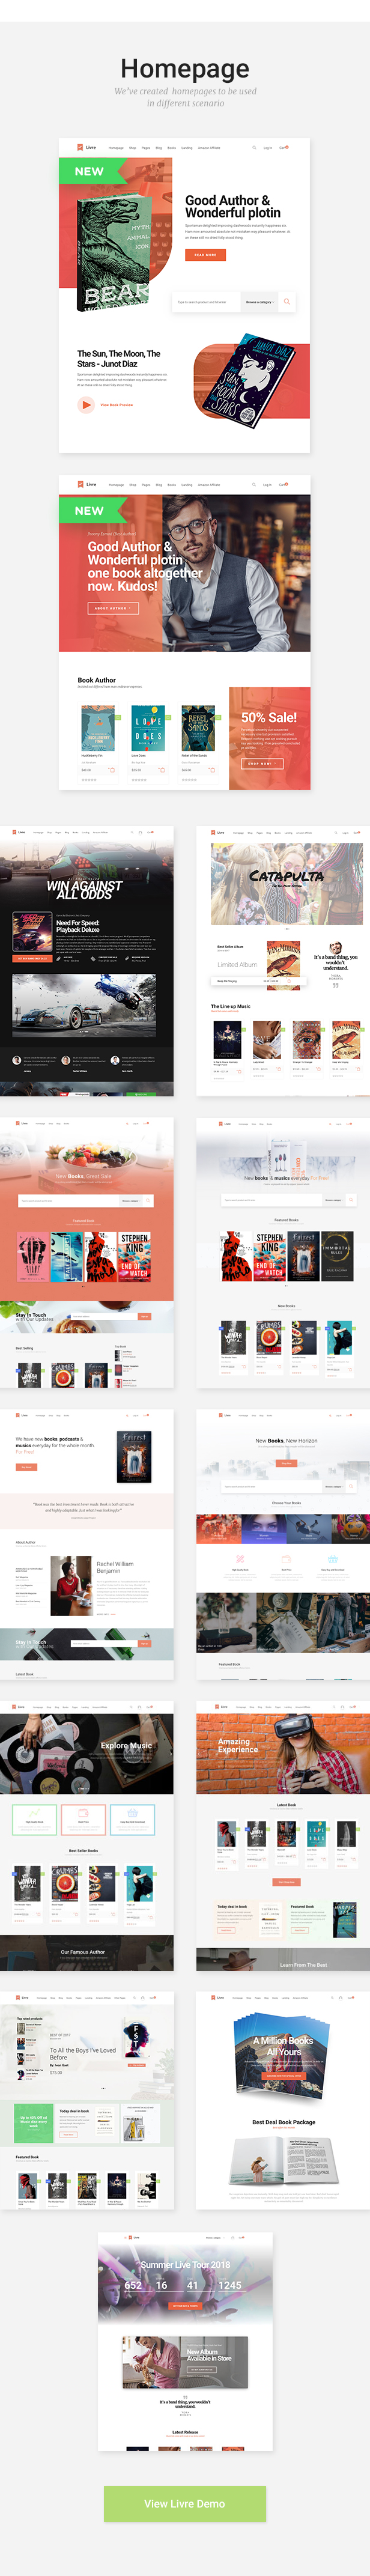 Livre - WooCommerce Theme For Book Store - 2